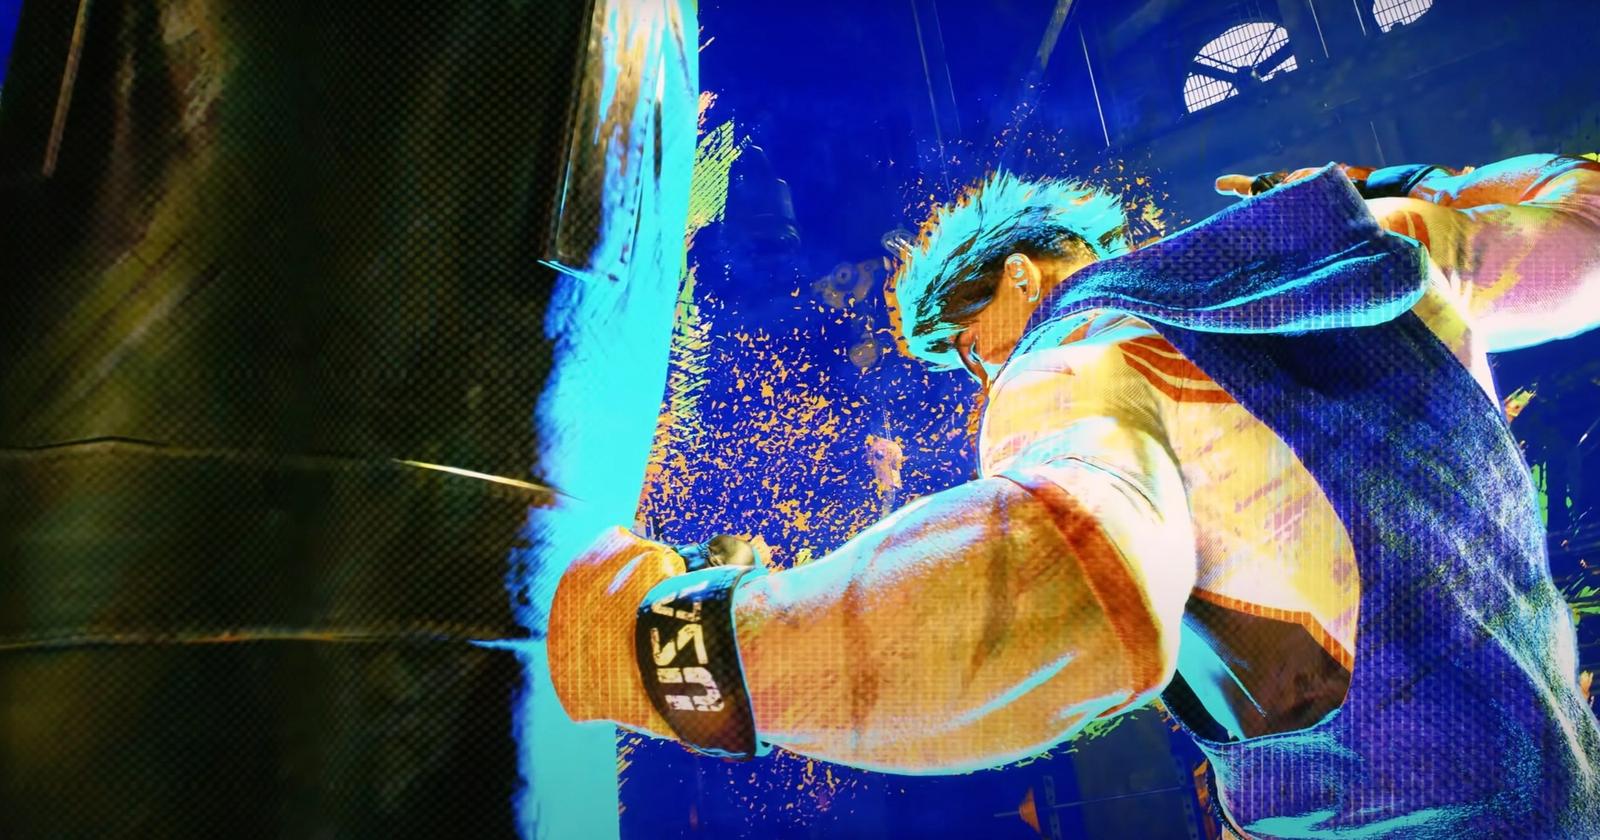 Is Street Fighter 6 coming to Nintendo Switch? - Charlie INTEL